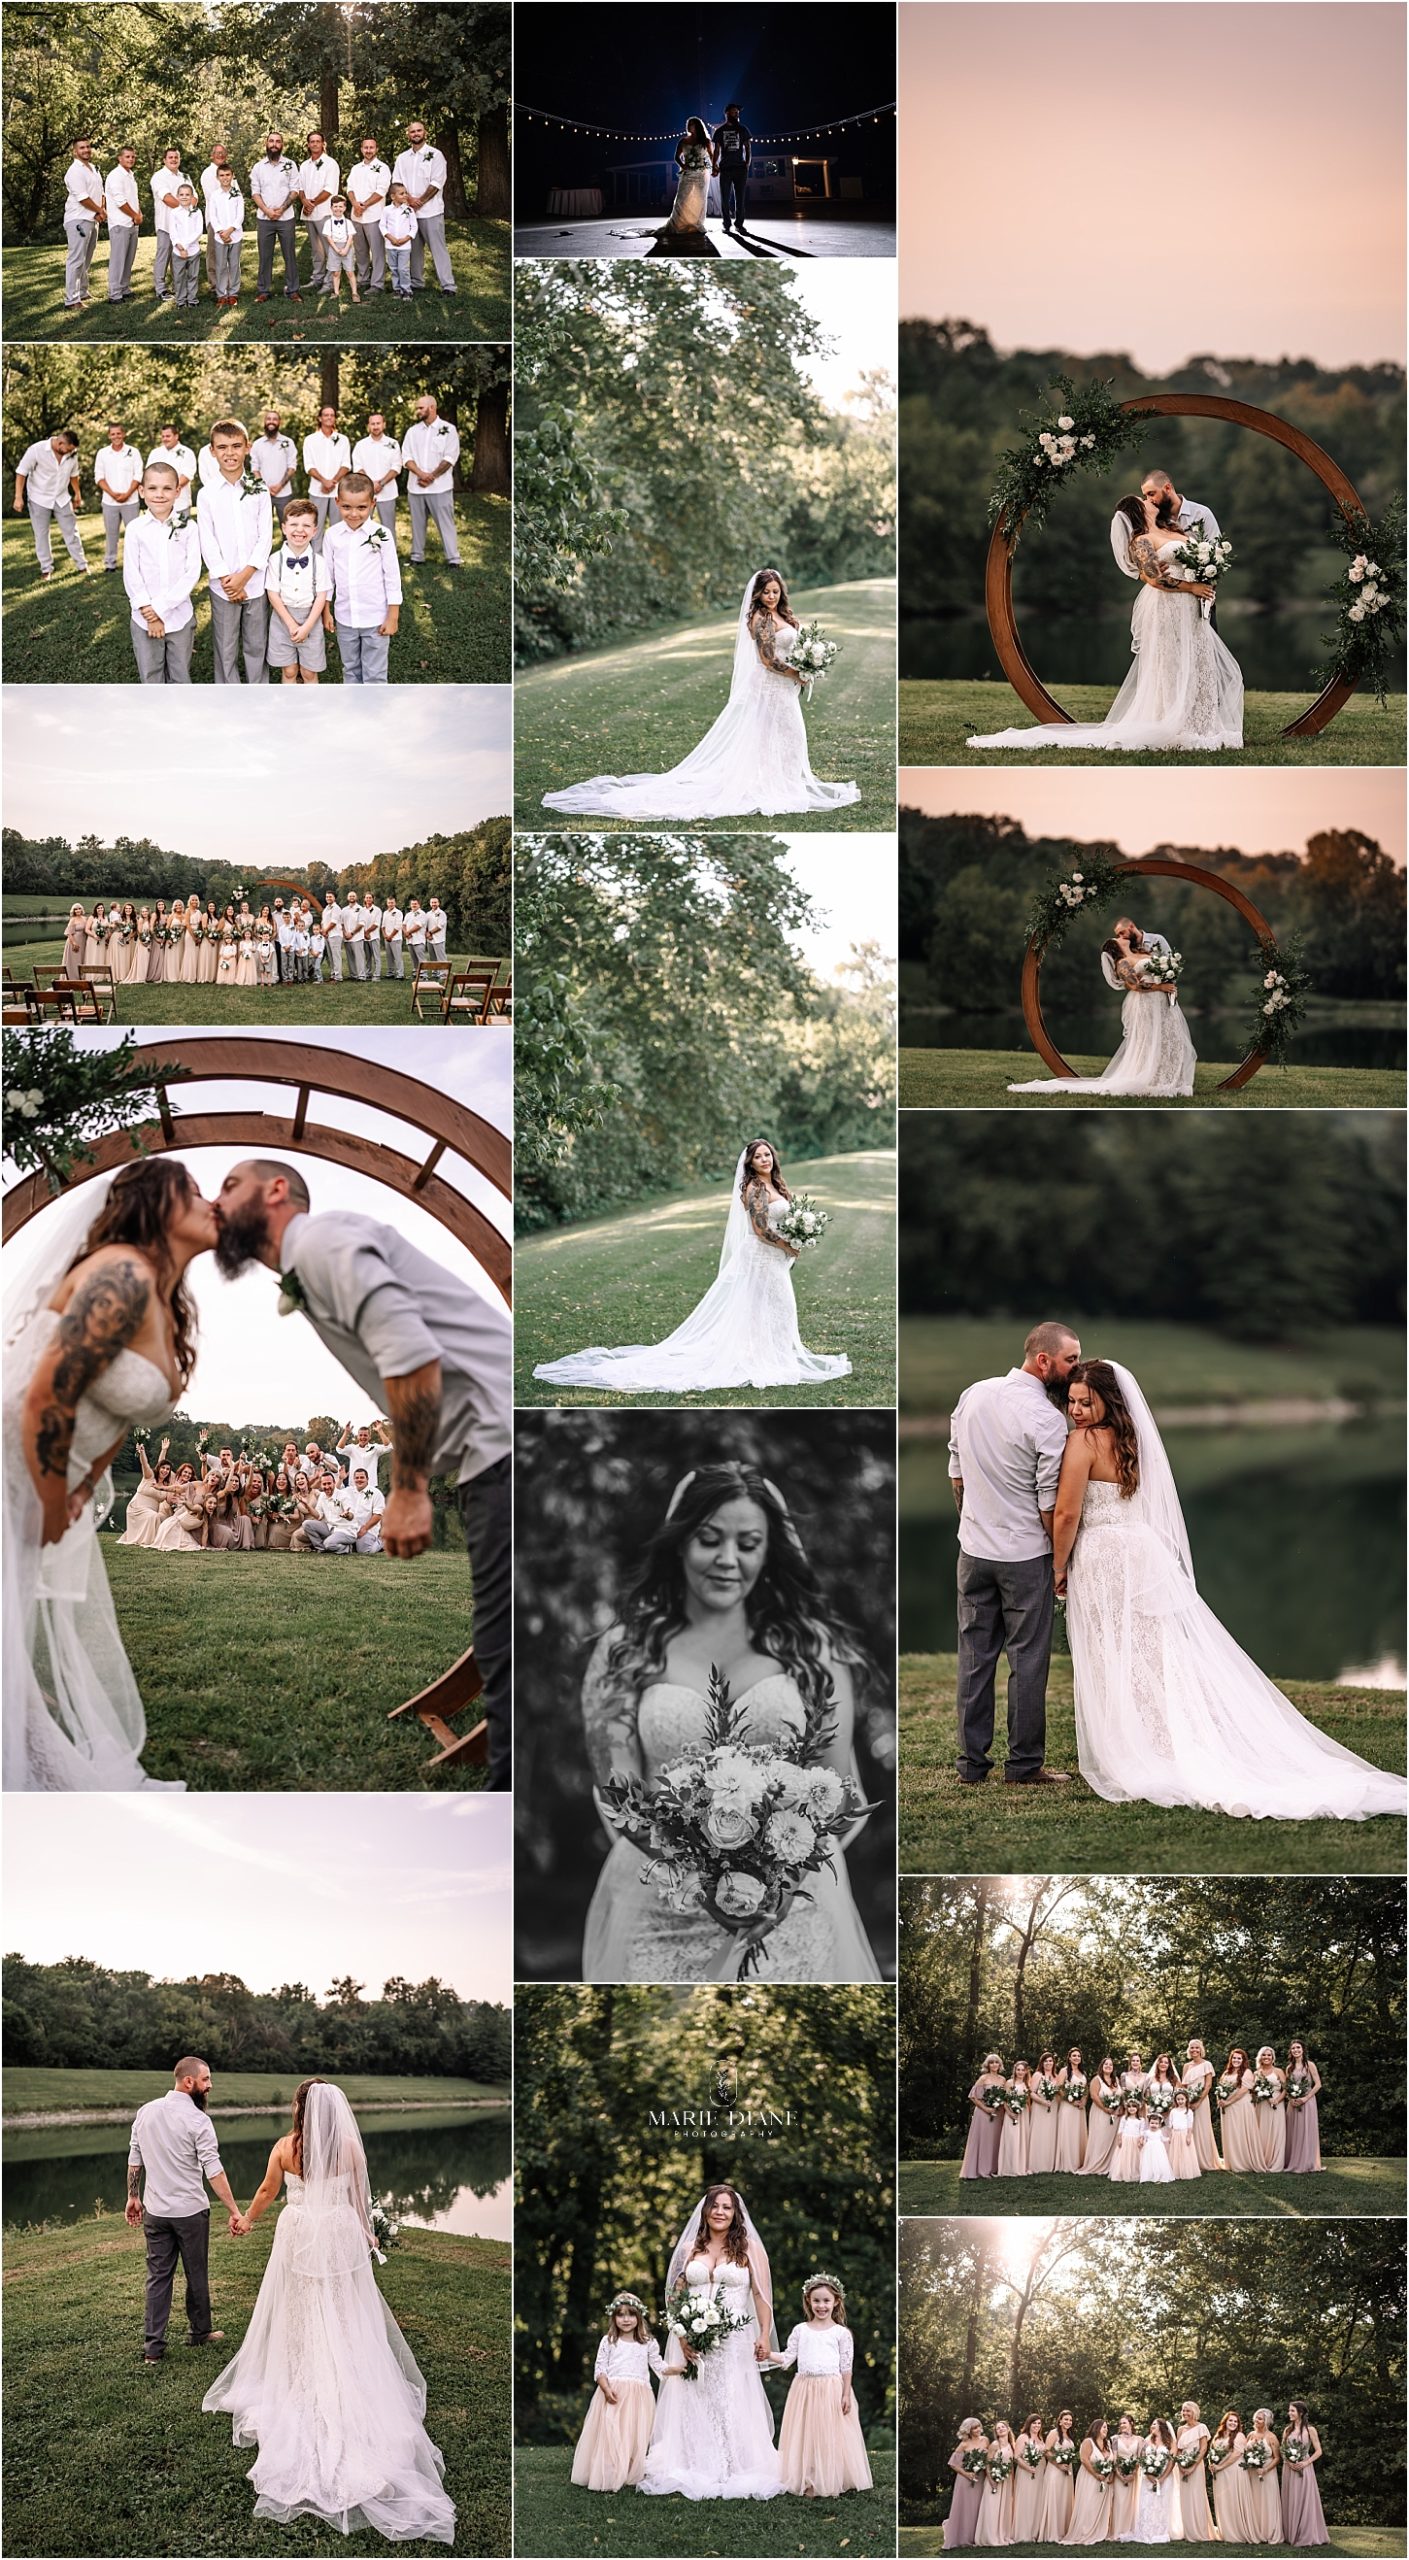 Wedding party posed images at Indie Hollow wedding venue